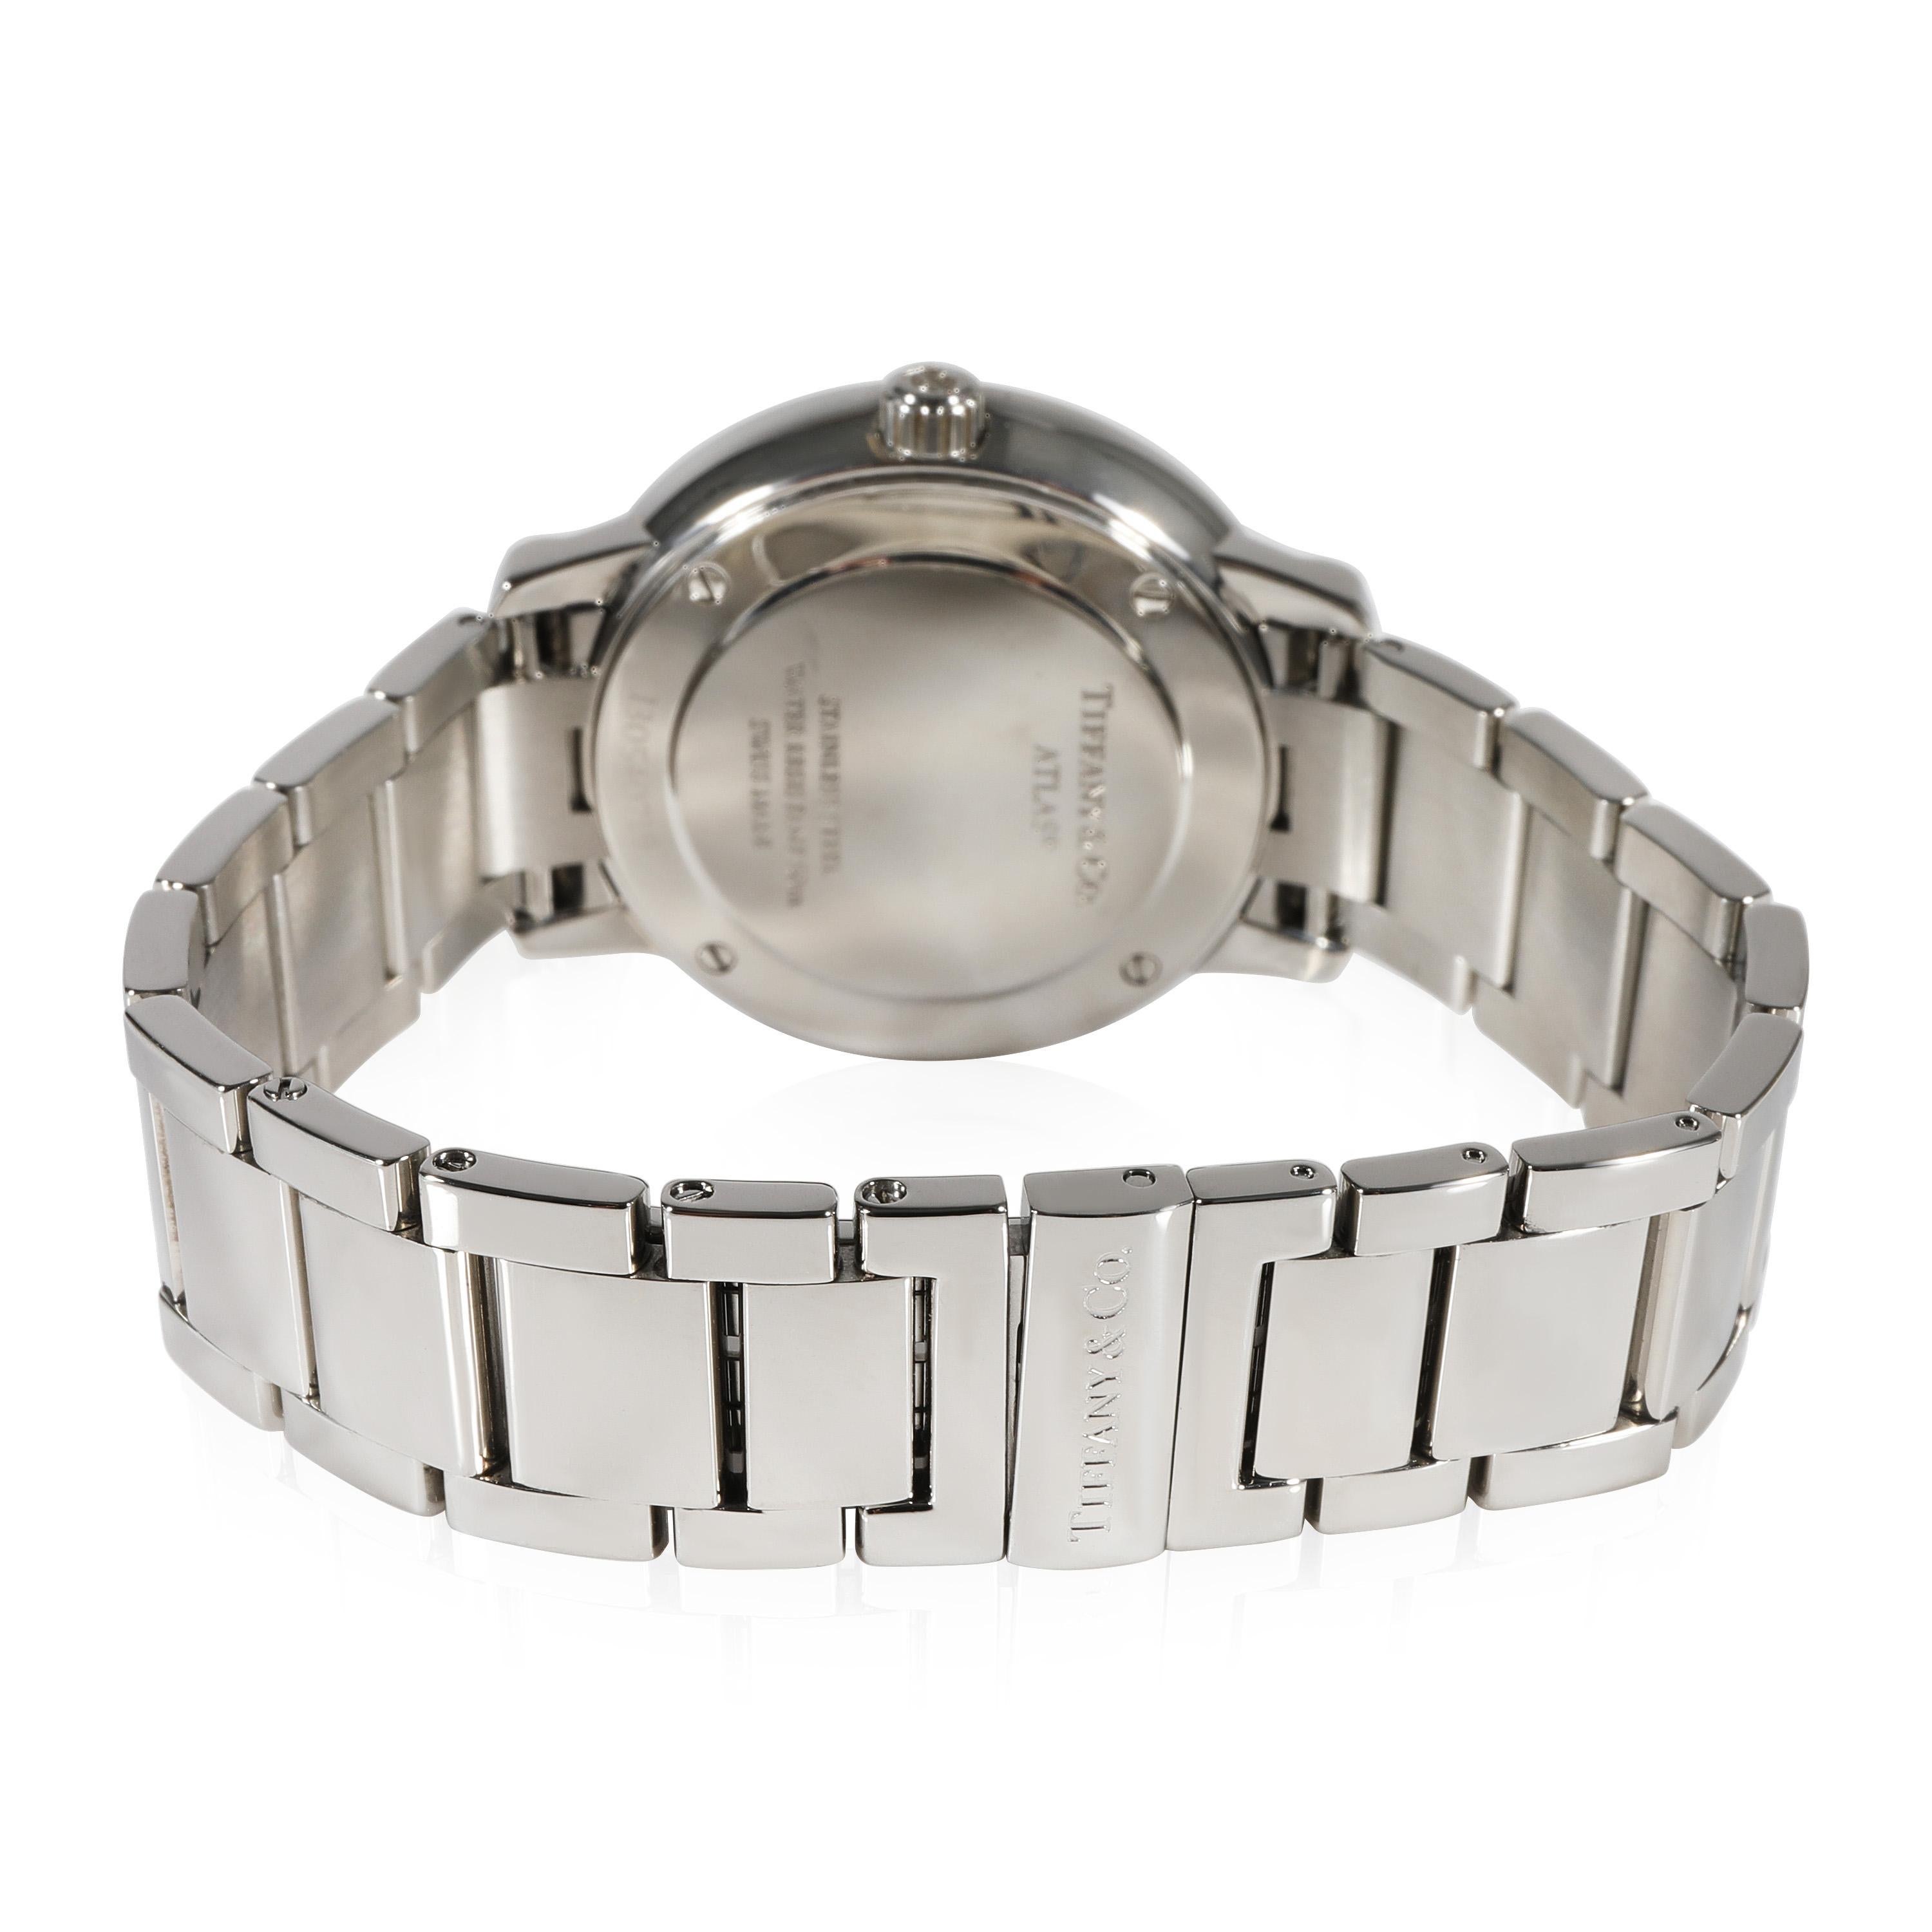 Tiffany & Co. Atlas 2-Hand Atlas Women's Watch in  Stainless Steel

SKU: 115551

PRIMARY DETAILS
Brand: Tiffany & Co.
Model: Atlas 2-Hand
Country of Origin: Switzerland
Movement Type: Quartz: Battery
Year of Manufacture: 2010-2019
Condition: Retail